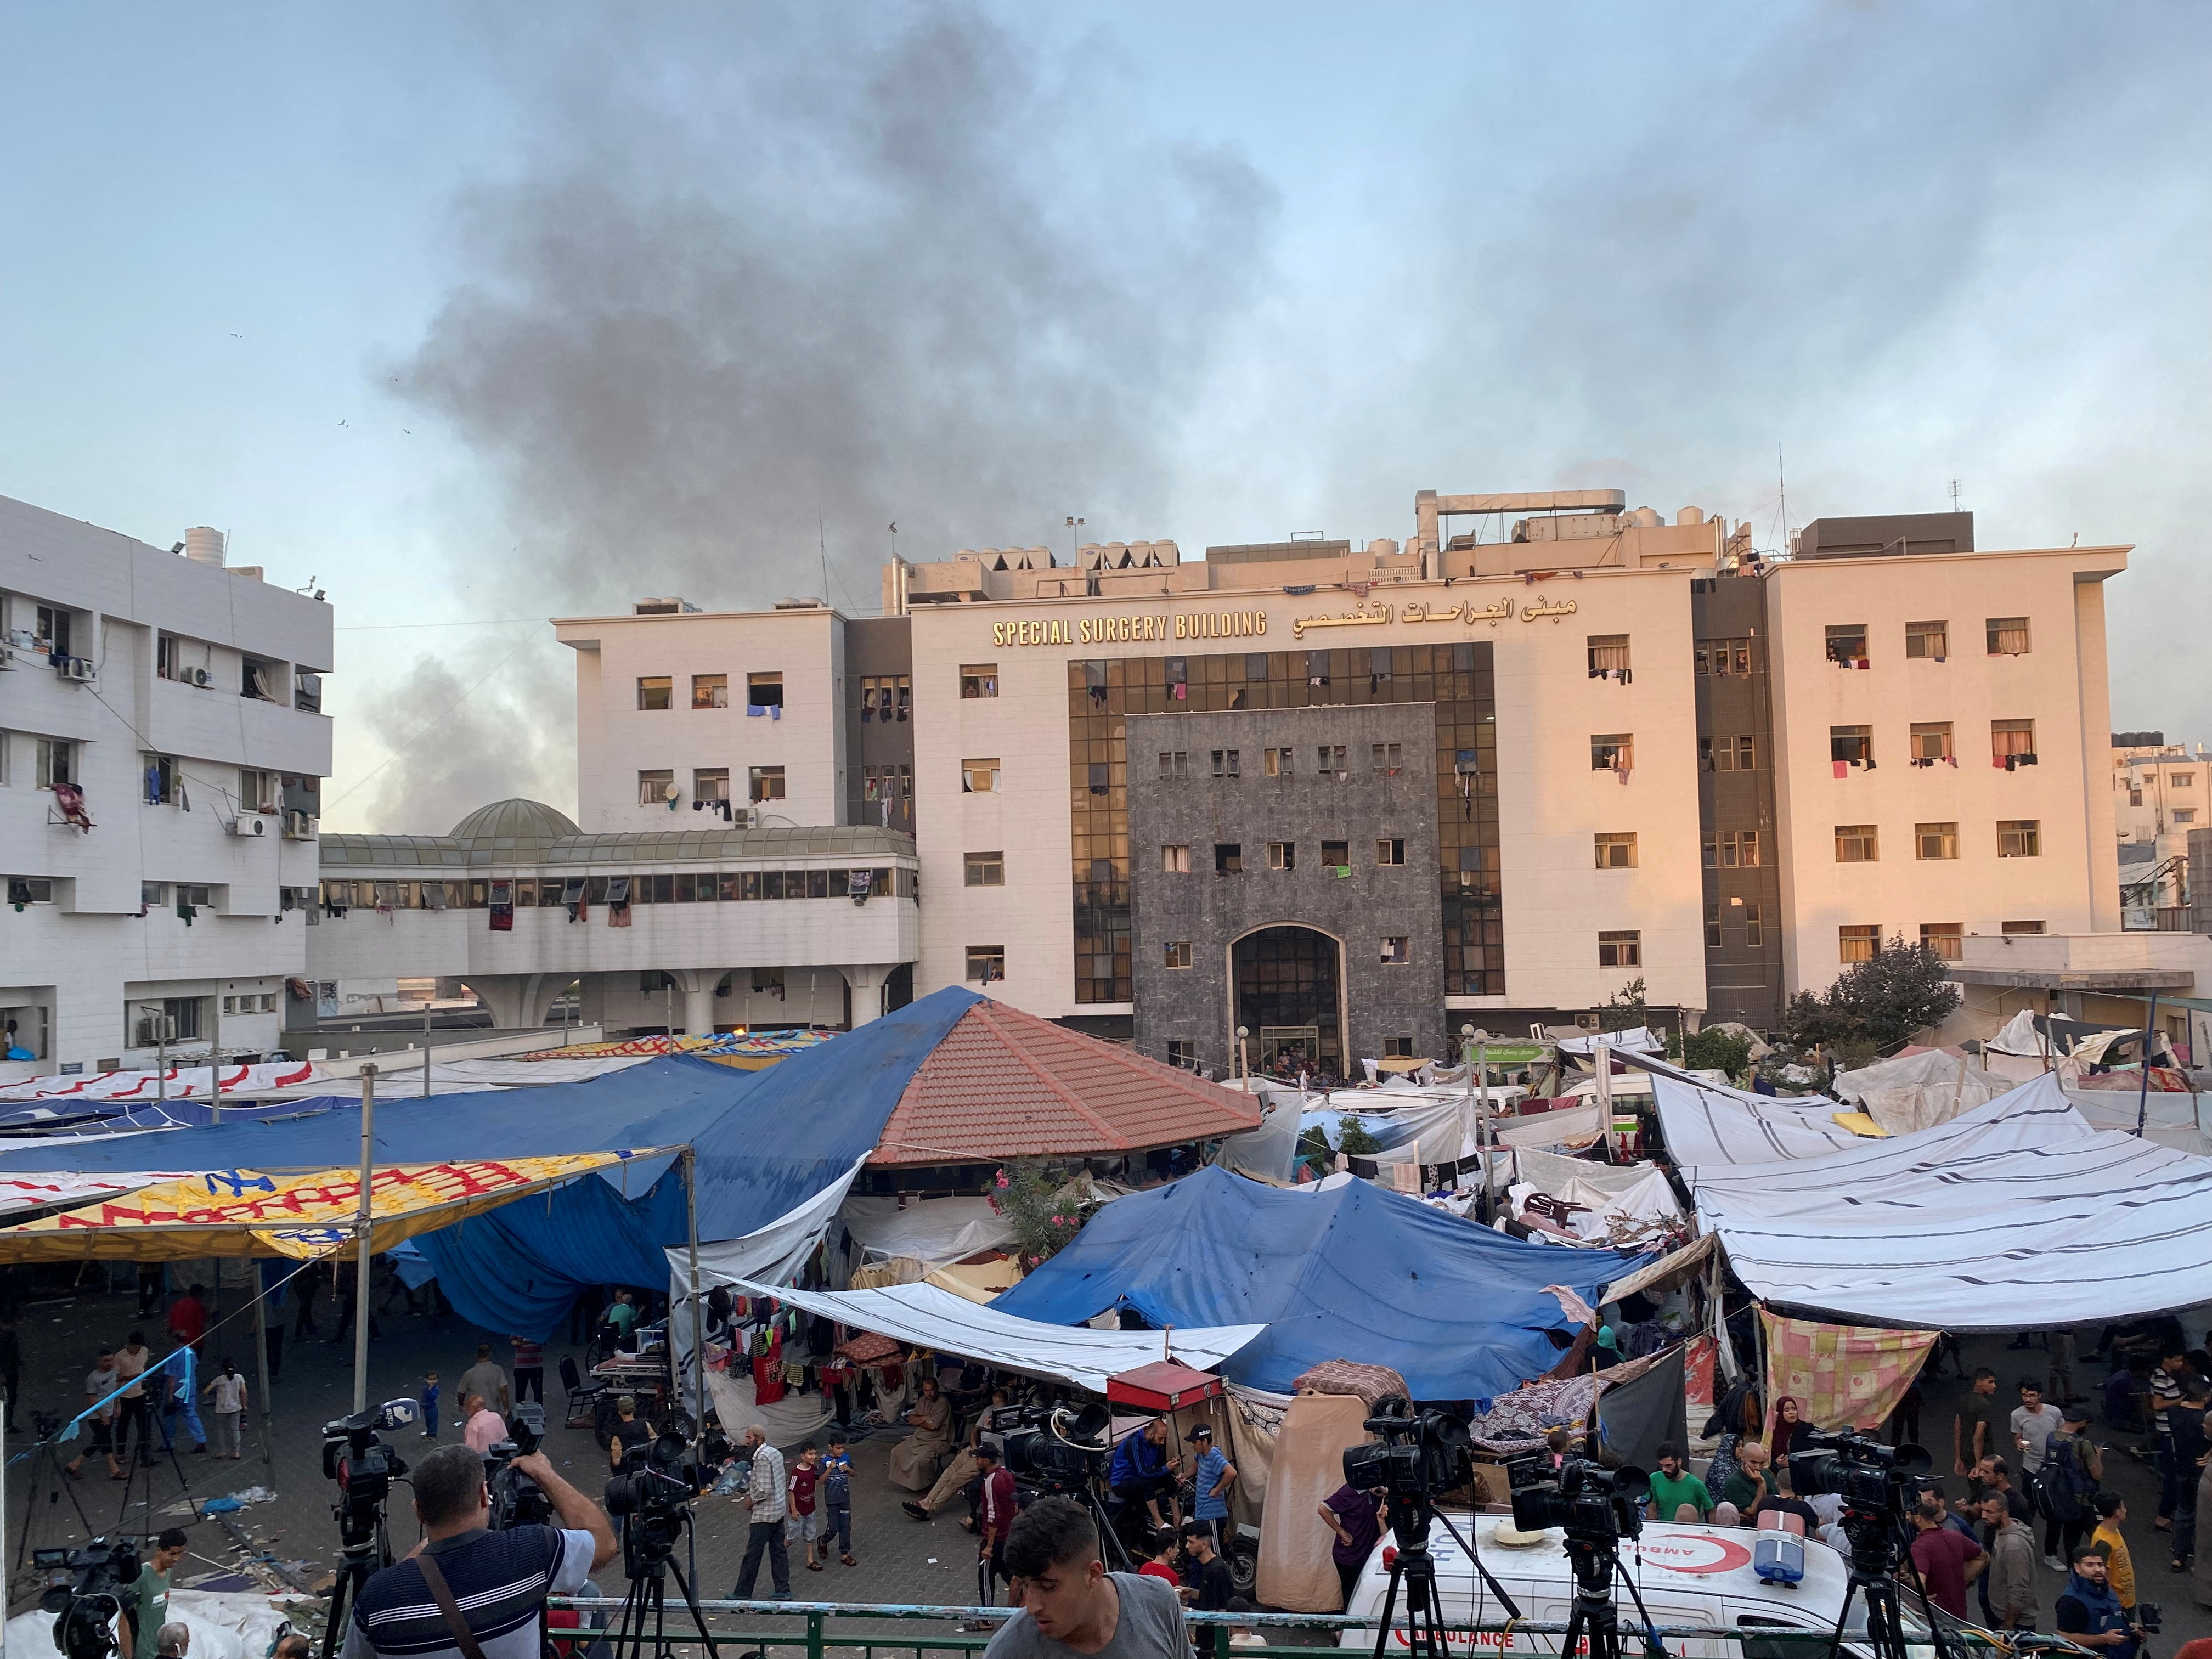 Thousands of people have sought care and shelter at Al Shifa hospital since the conflict between Israel and Hamas began in October. But the hospital has now been encircled by Israeli troops and civilians and medical staff have been caught in the crossfire./Reuters/Doaa Rouqa.